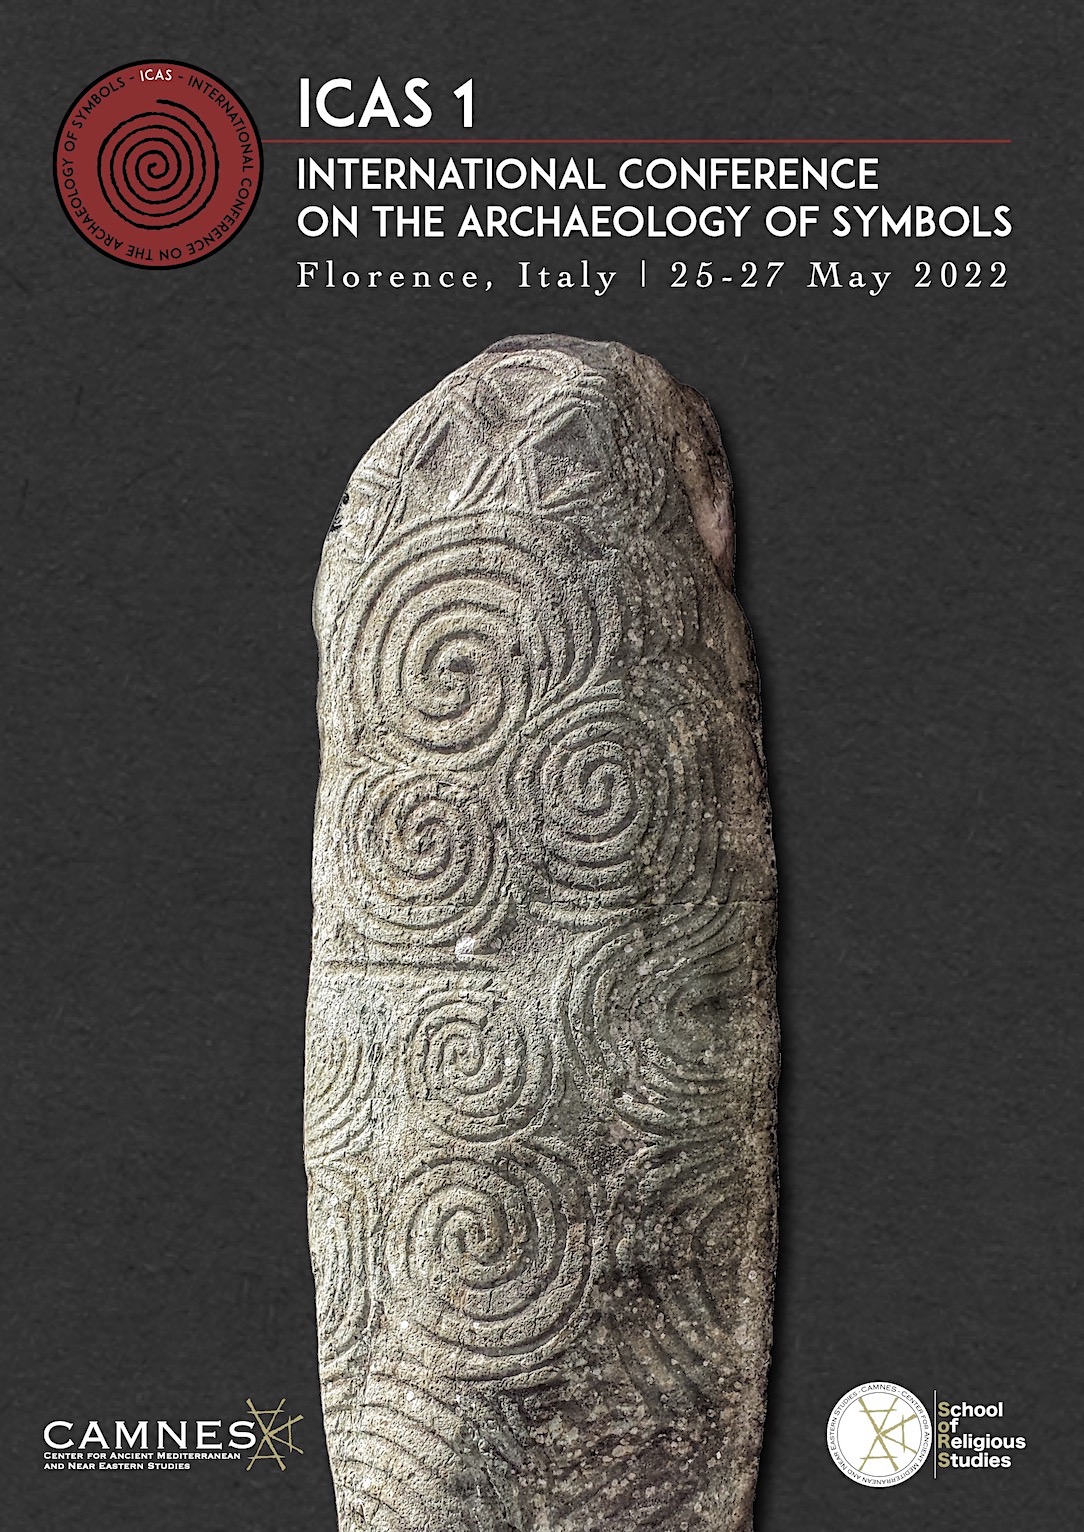 ICAS 1 International Conference on the Archaeology of Symbols